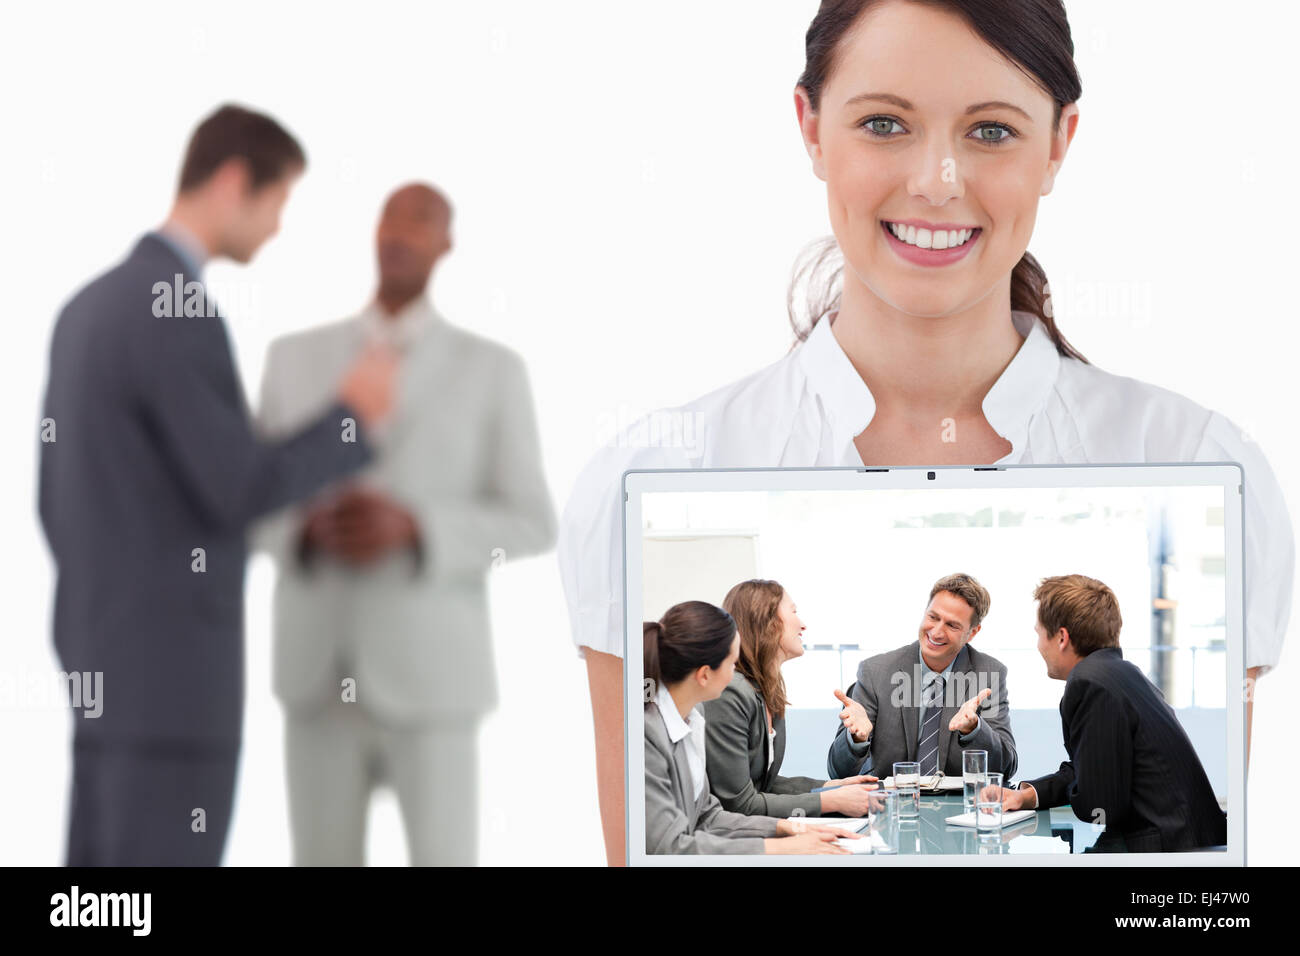 Composite image of happy team laughing together at a meeting Stock Photo